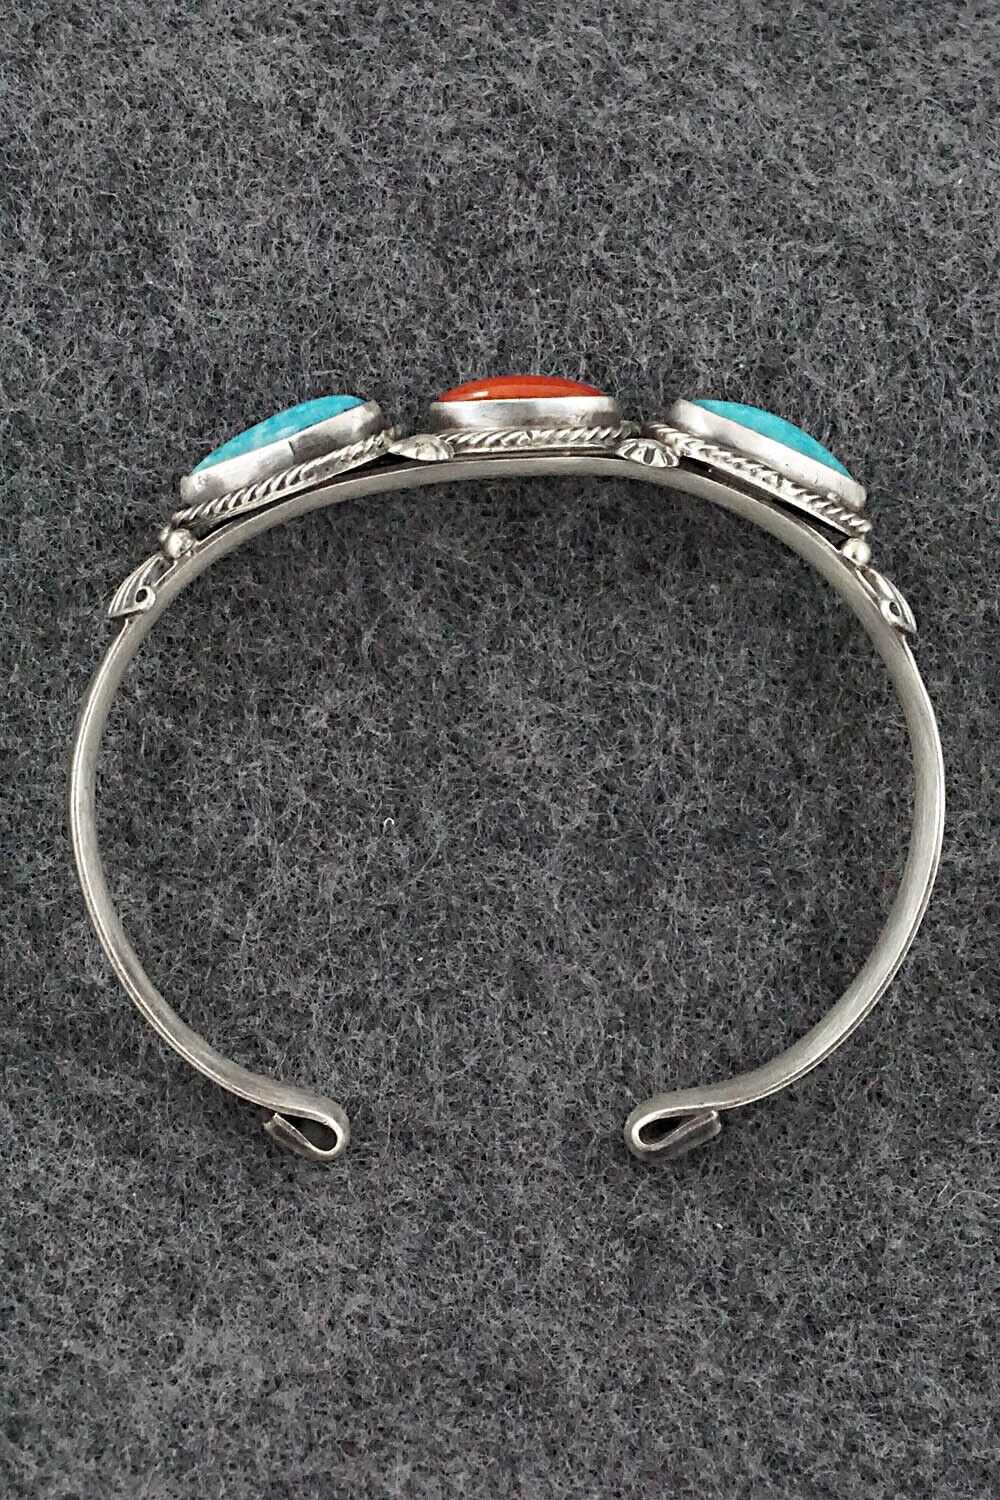 Turquoise, Coral & Sterling Silver Bracelet - Bobby Platero